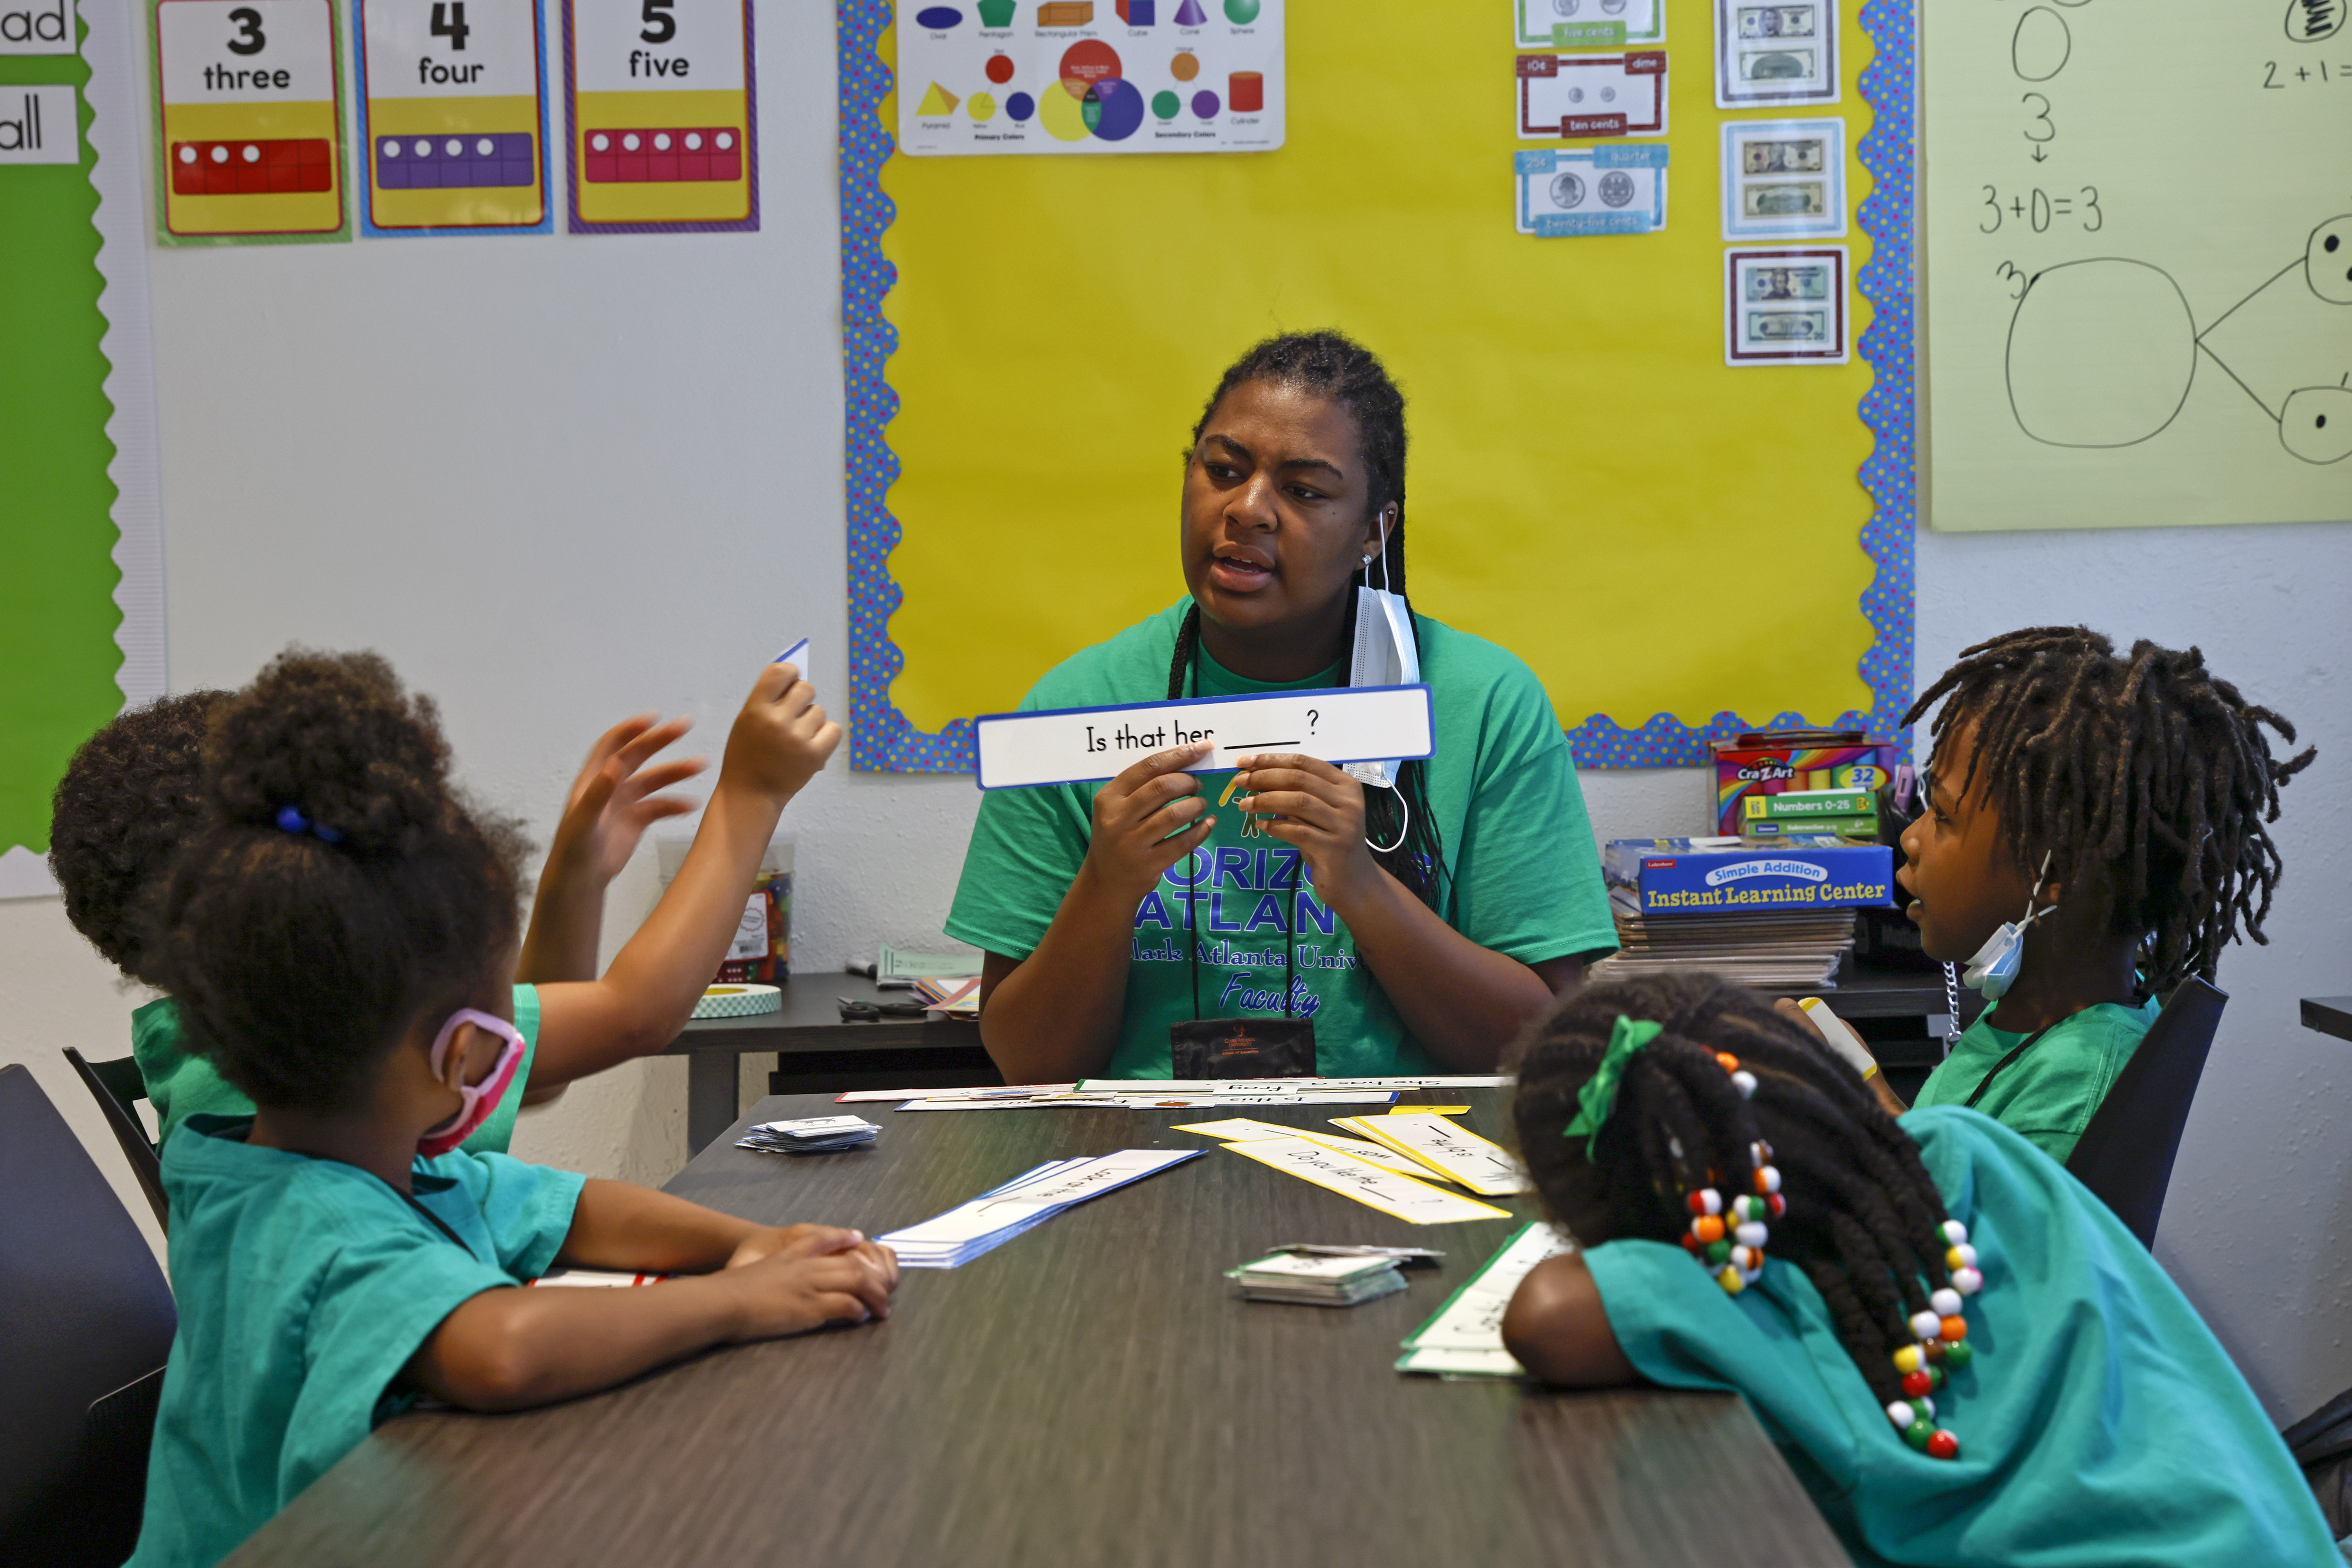 Jayla Atkins, a Clark Atlanta University senior, works with a group of first graders in the Horizons Atlanta summer program on Thursday, June 9, 2022. Clark Atlanta educators are participating in a five-day conference organized by the United Negro College Fund that aims to help historically Black colleges and universities improve academic services in areas like online education, technology and student performance. (Natrice Miller / natrice.miller@ajc.com)
